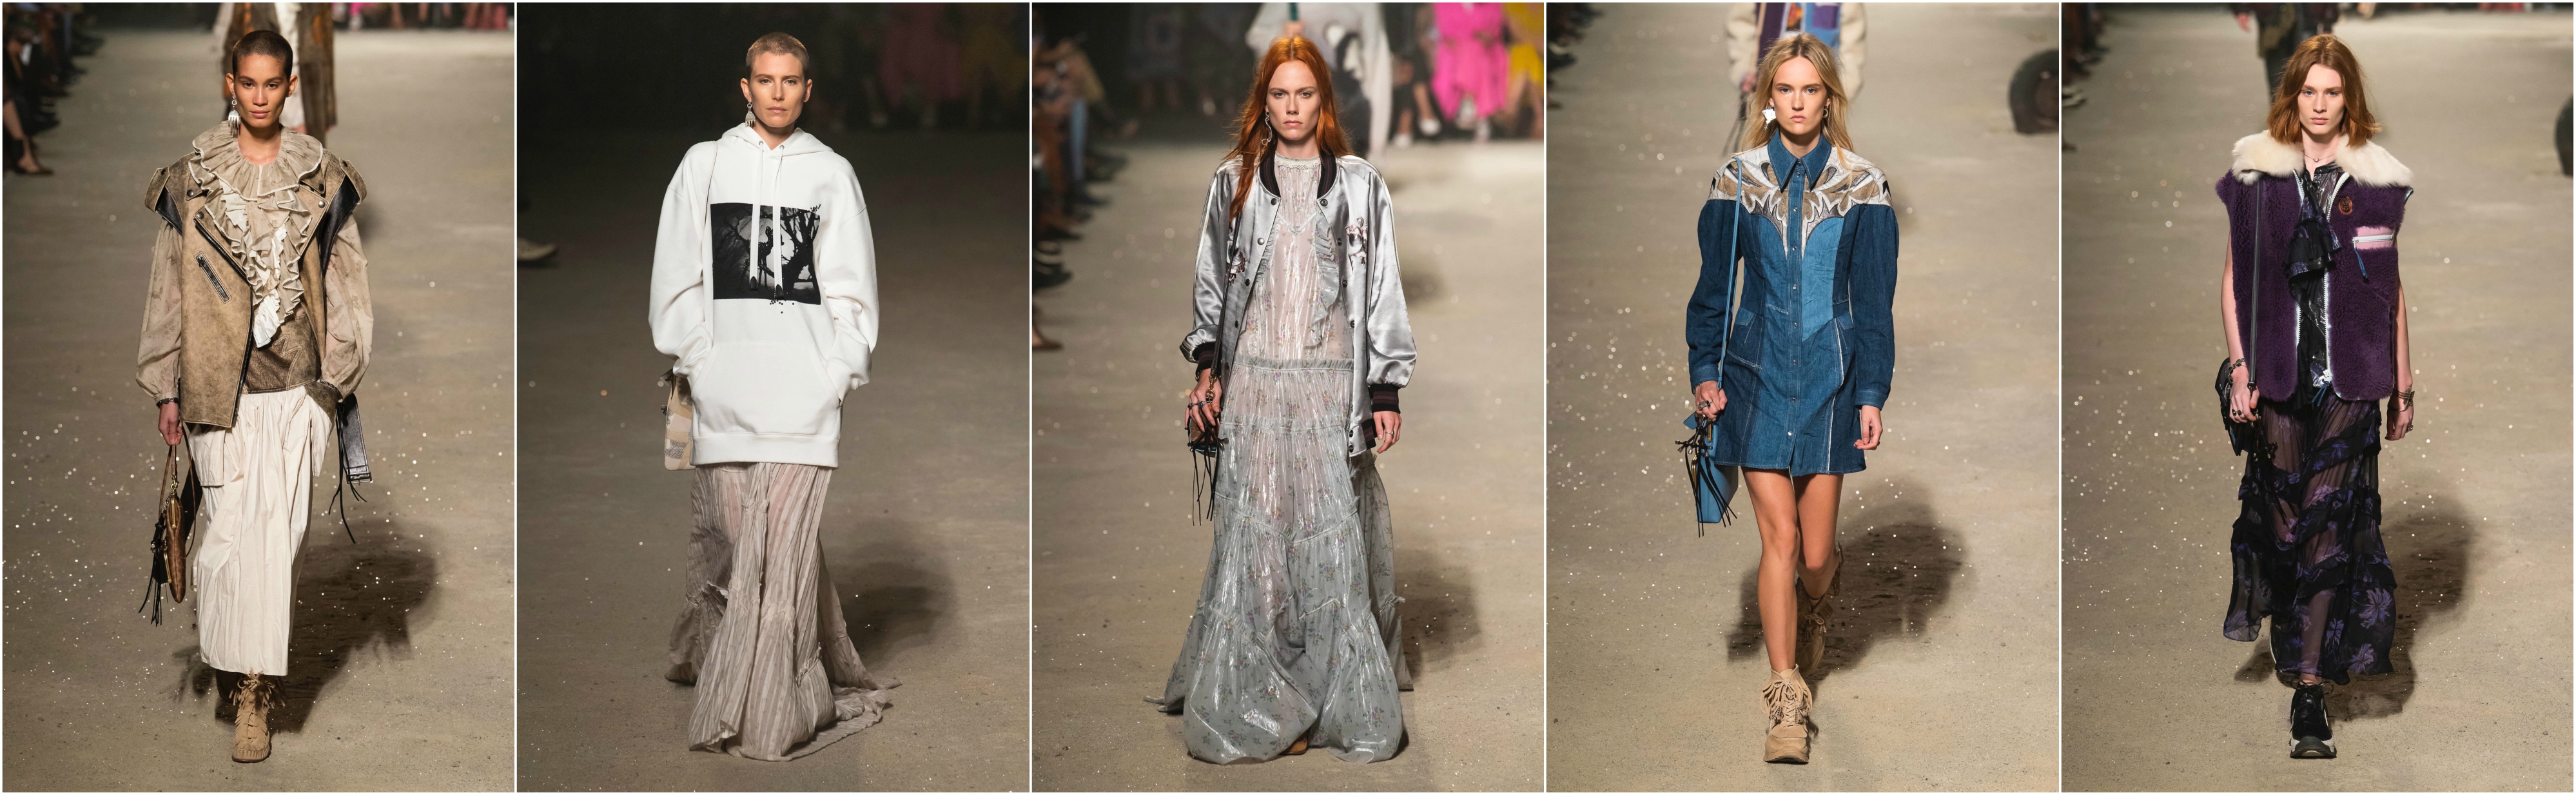 NYFW SPRING 2019 RUNWAY HIGHLIGHTS | THE UNTITLED MAGAZINE